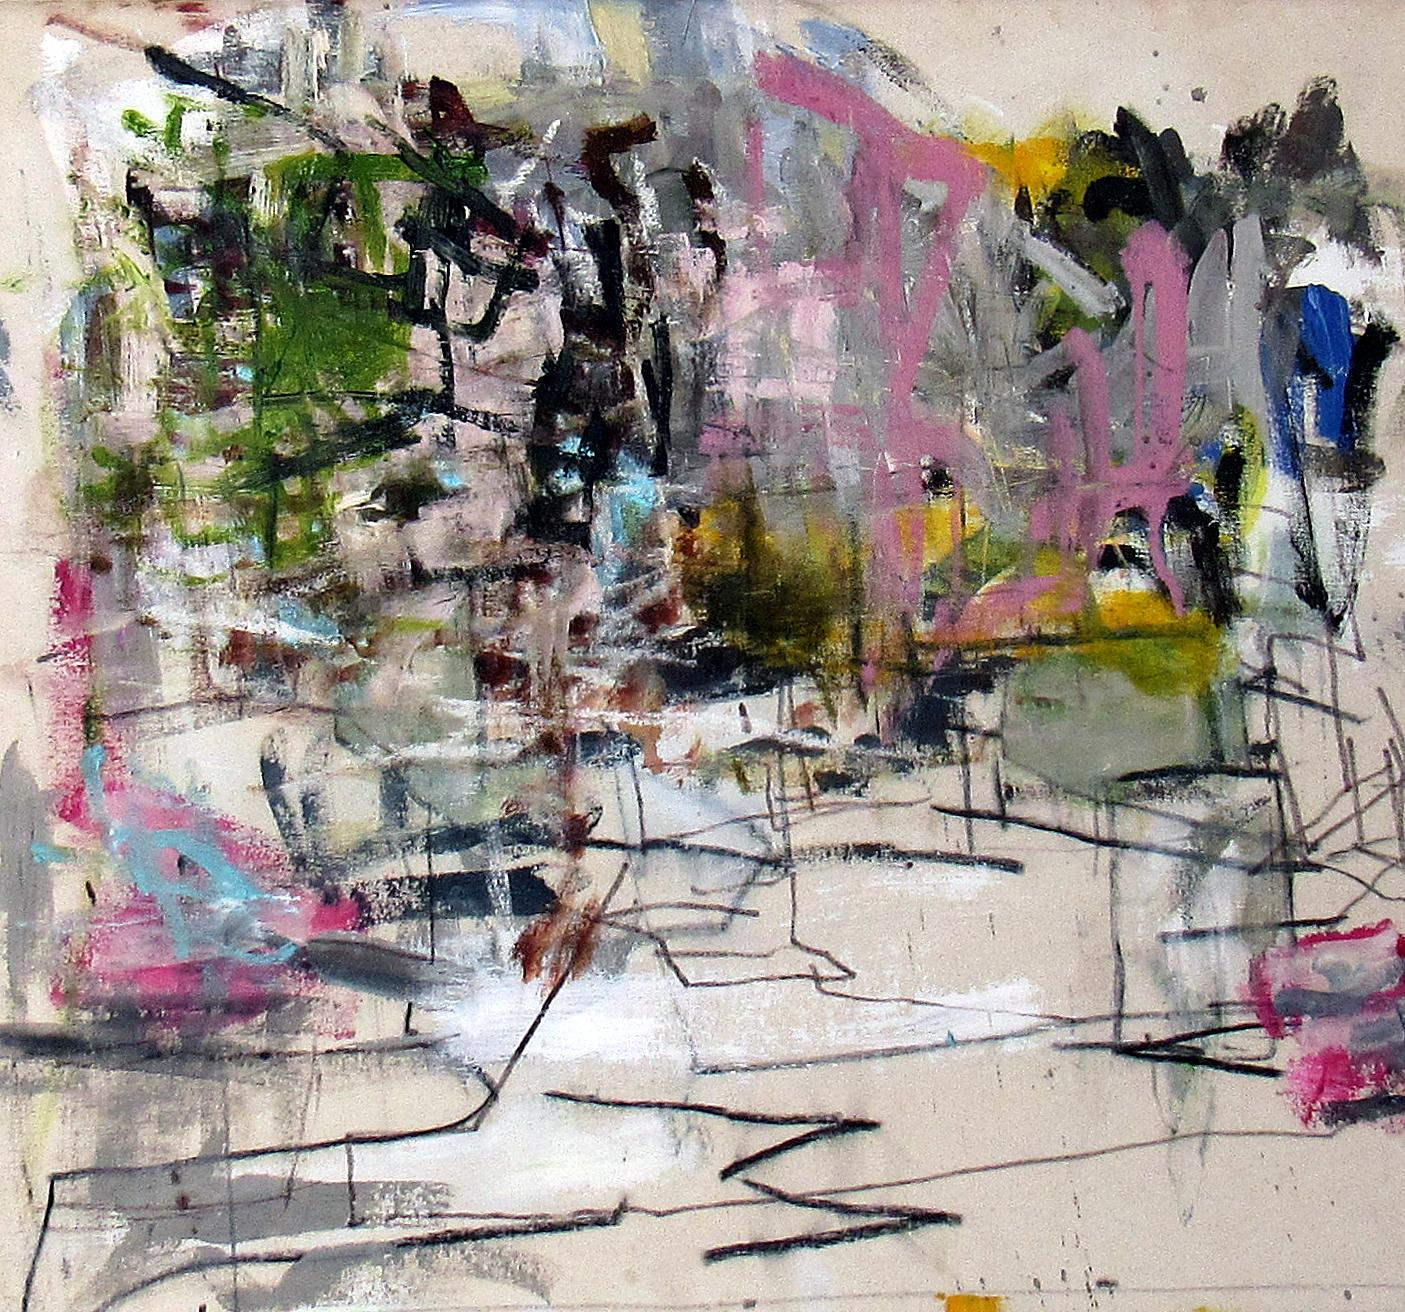 West End, colorful gestural abstract painting